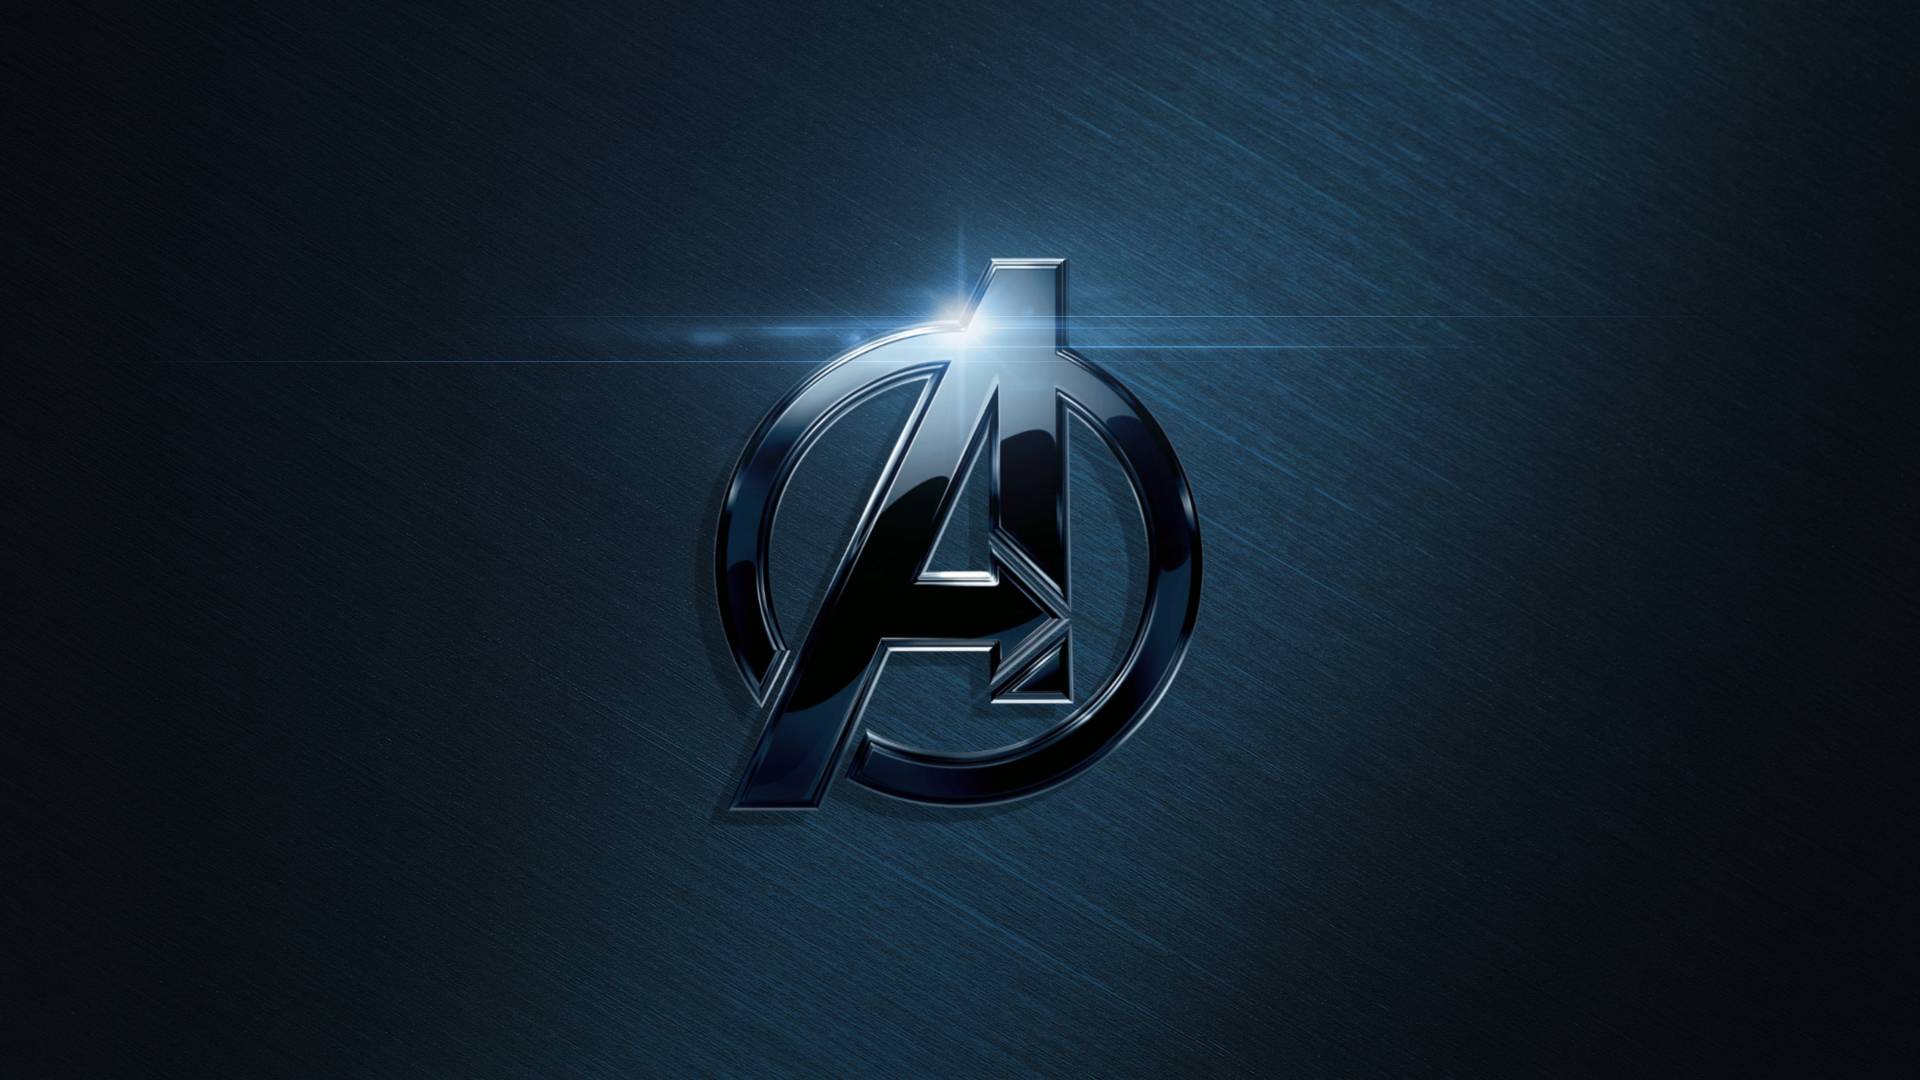 Cool Hero Logo - Get your Super Hero fix with these 20 awesome wallpaper